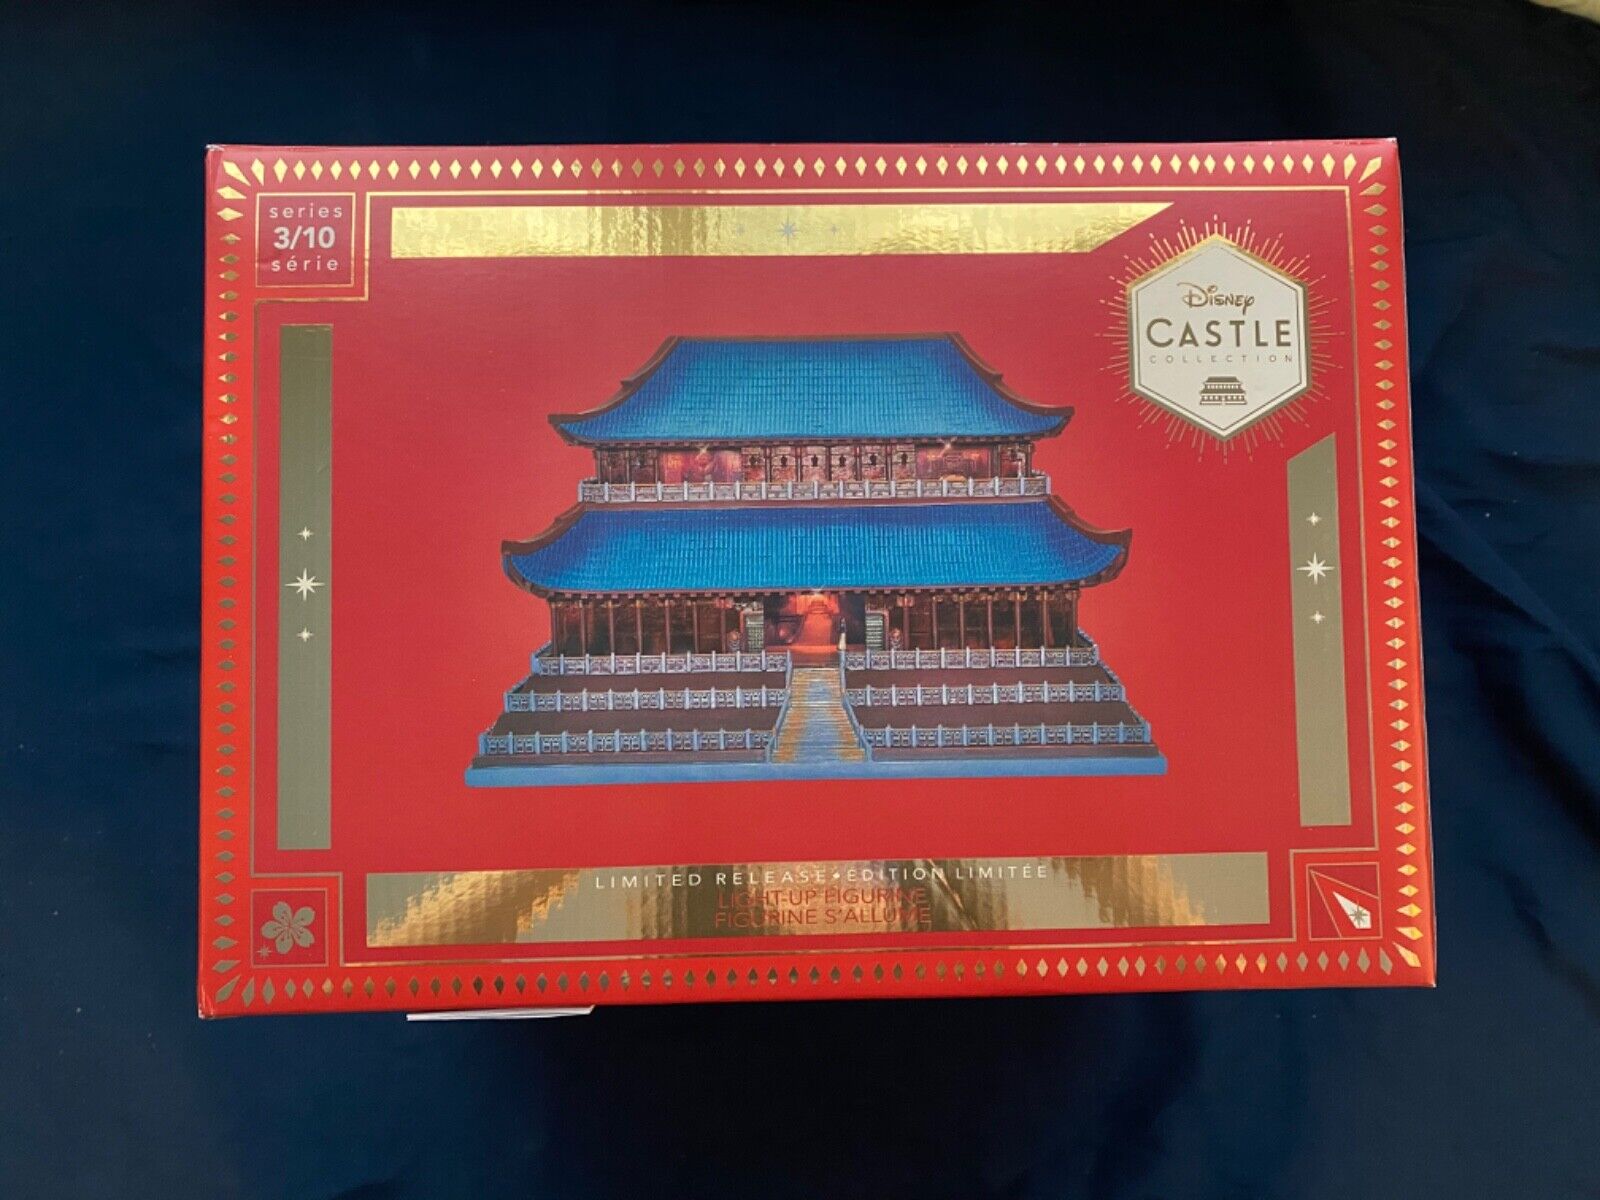 Disney Castle Collection Mulan Imperial Palace Light Up Figurine 3/10